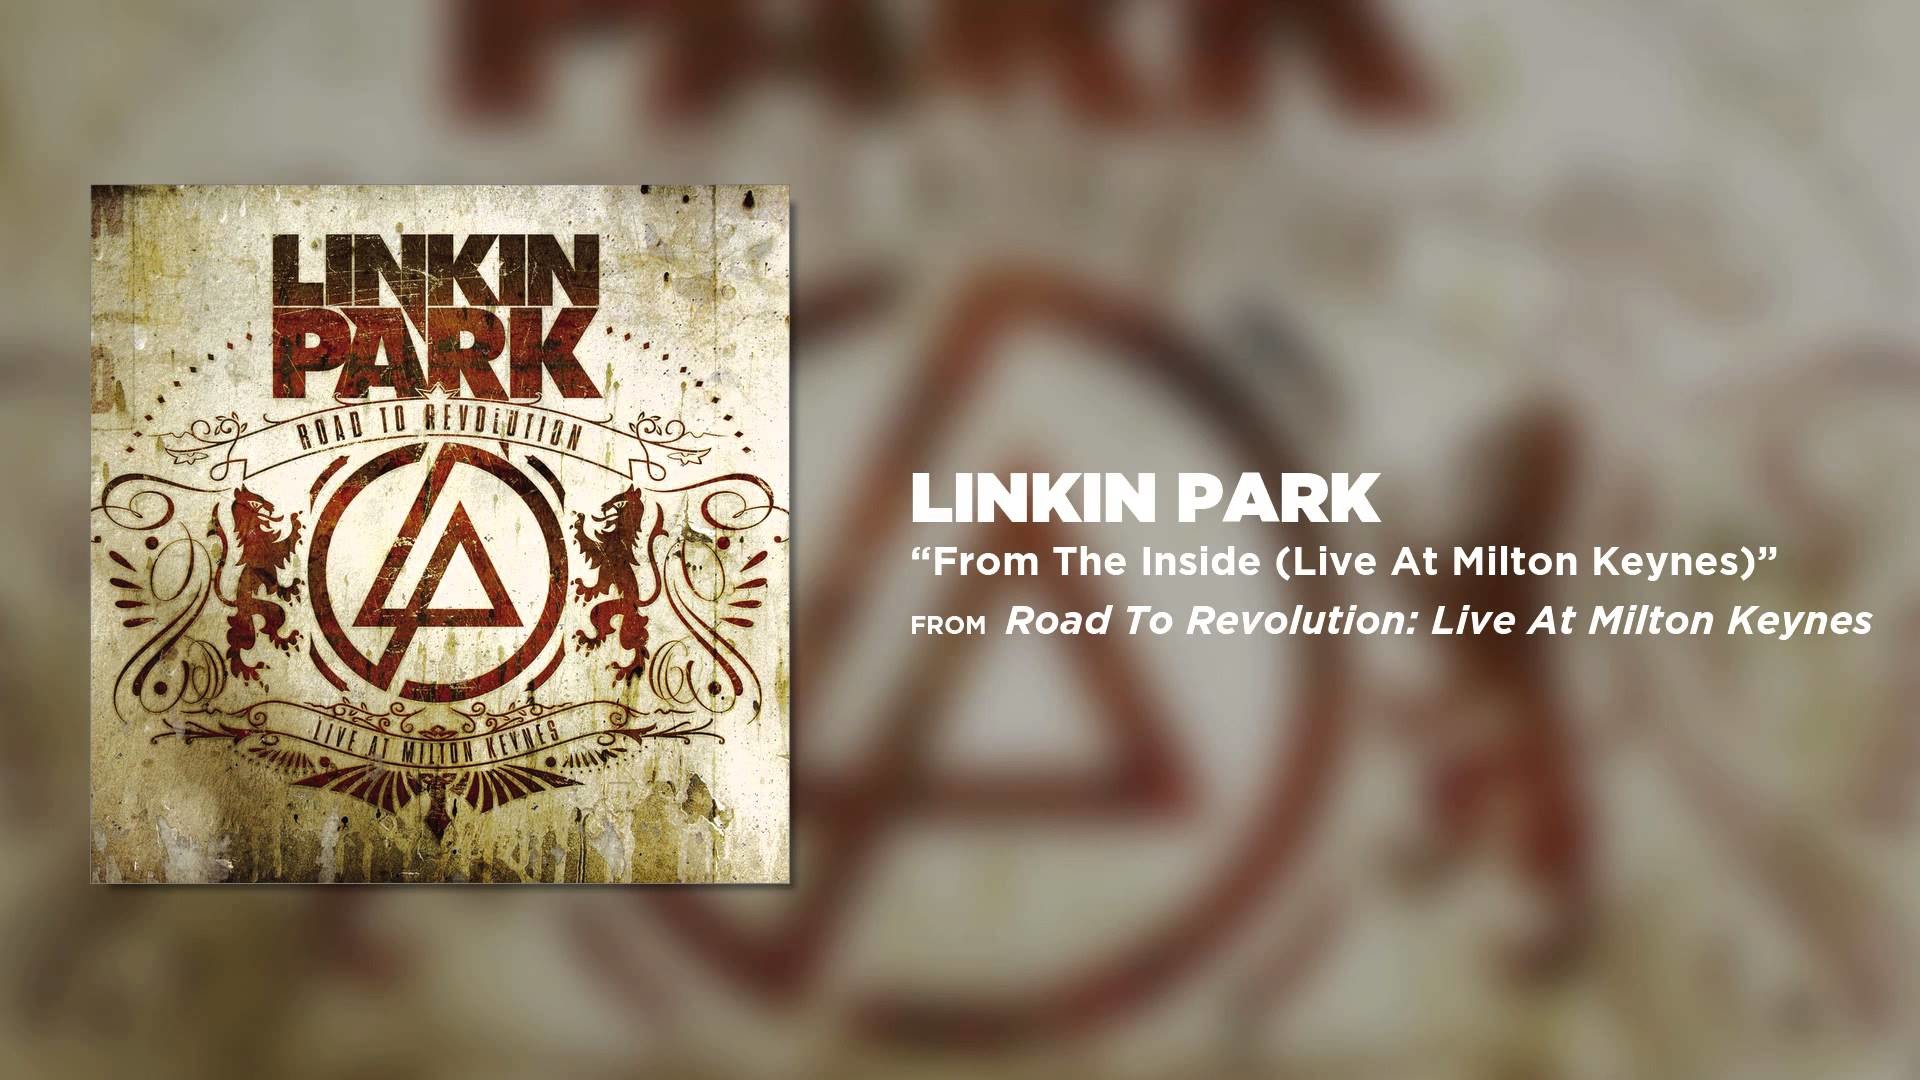 1920x1080 From The Inside - Linkin Park (Road to Revolution: Live at Milton Keynes)